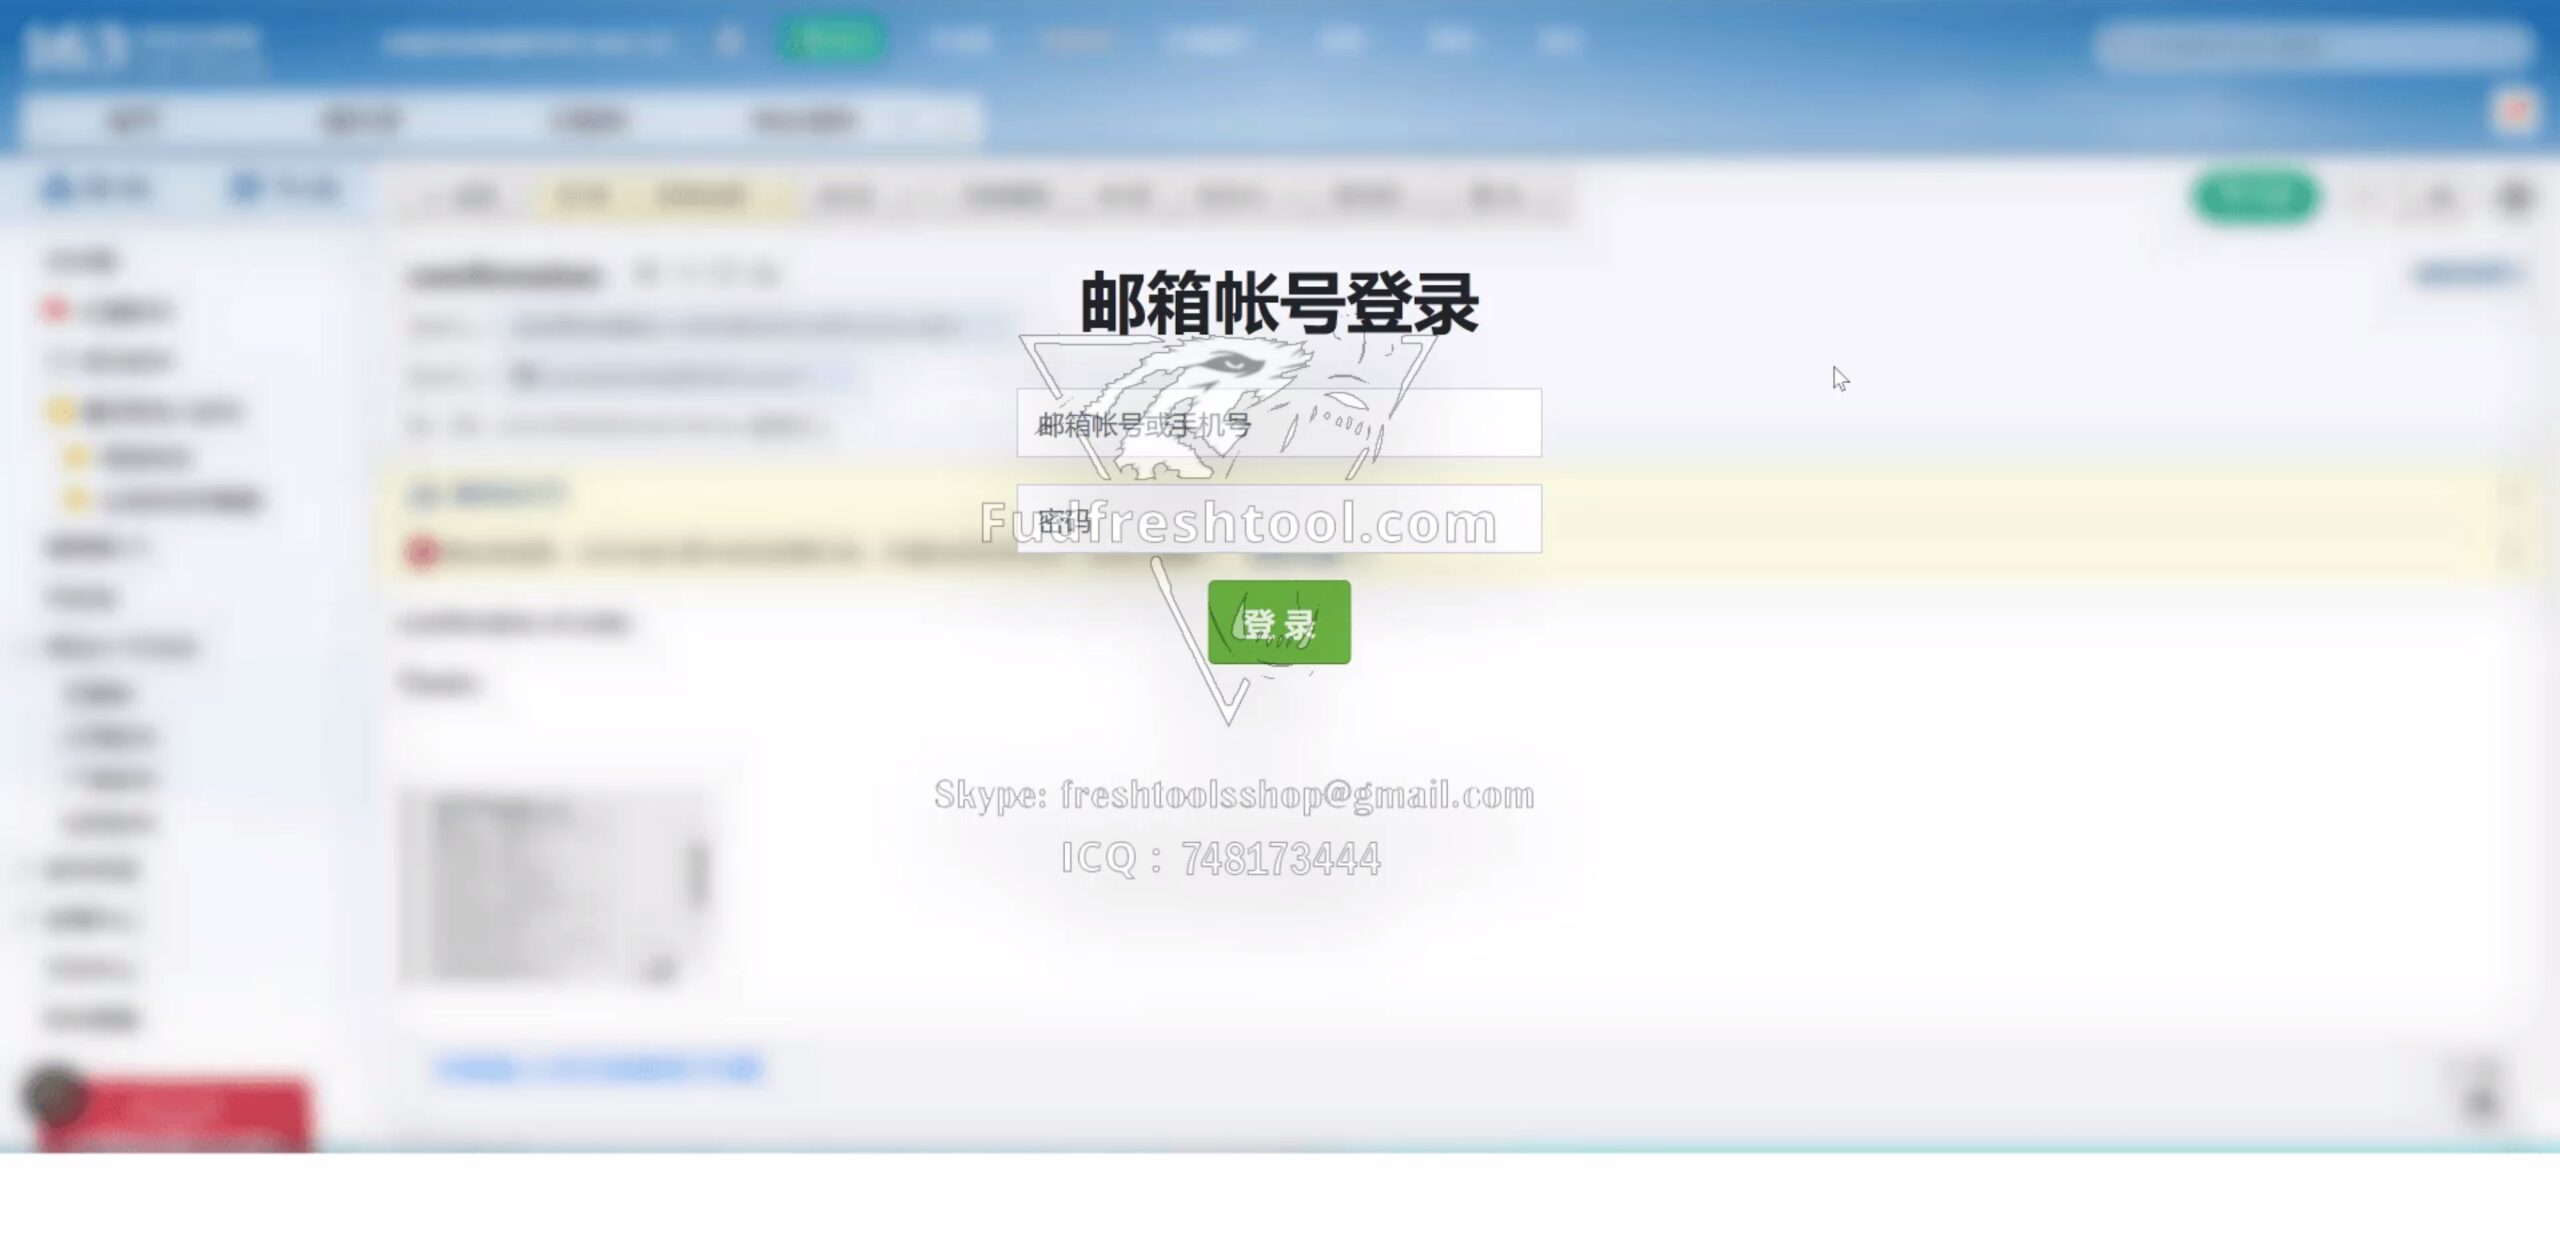 Chinese Login Scam Page